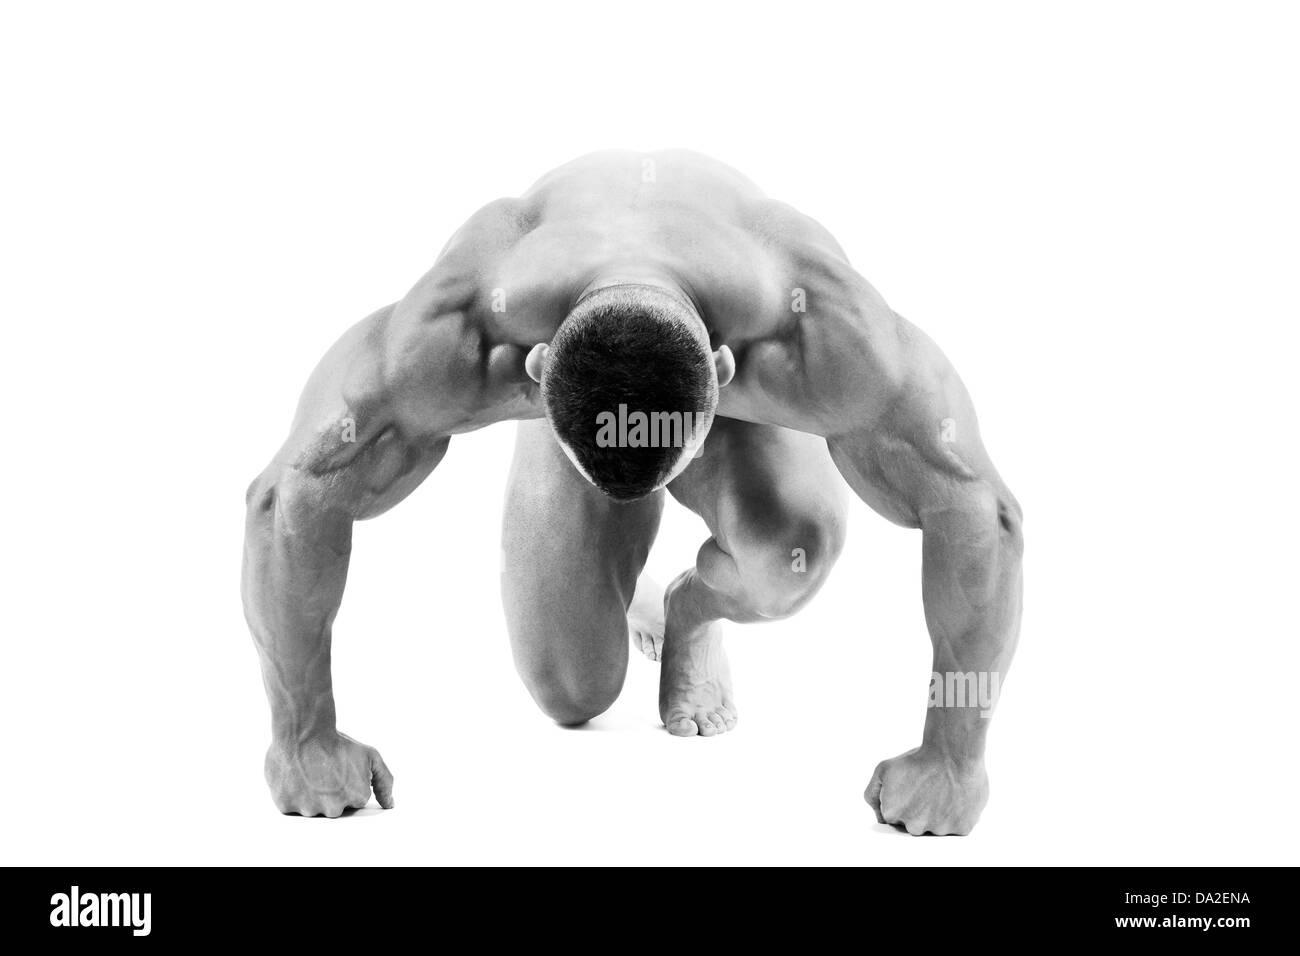 Musculation Homme Athlétique Musculation Image stock - Image du musculaire,  obliger: 211152187